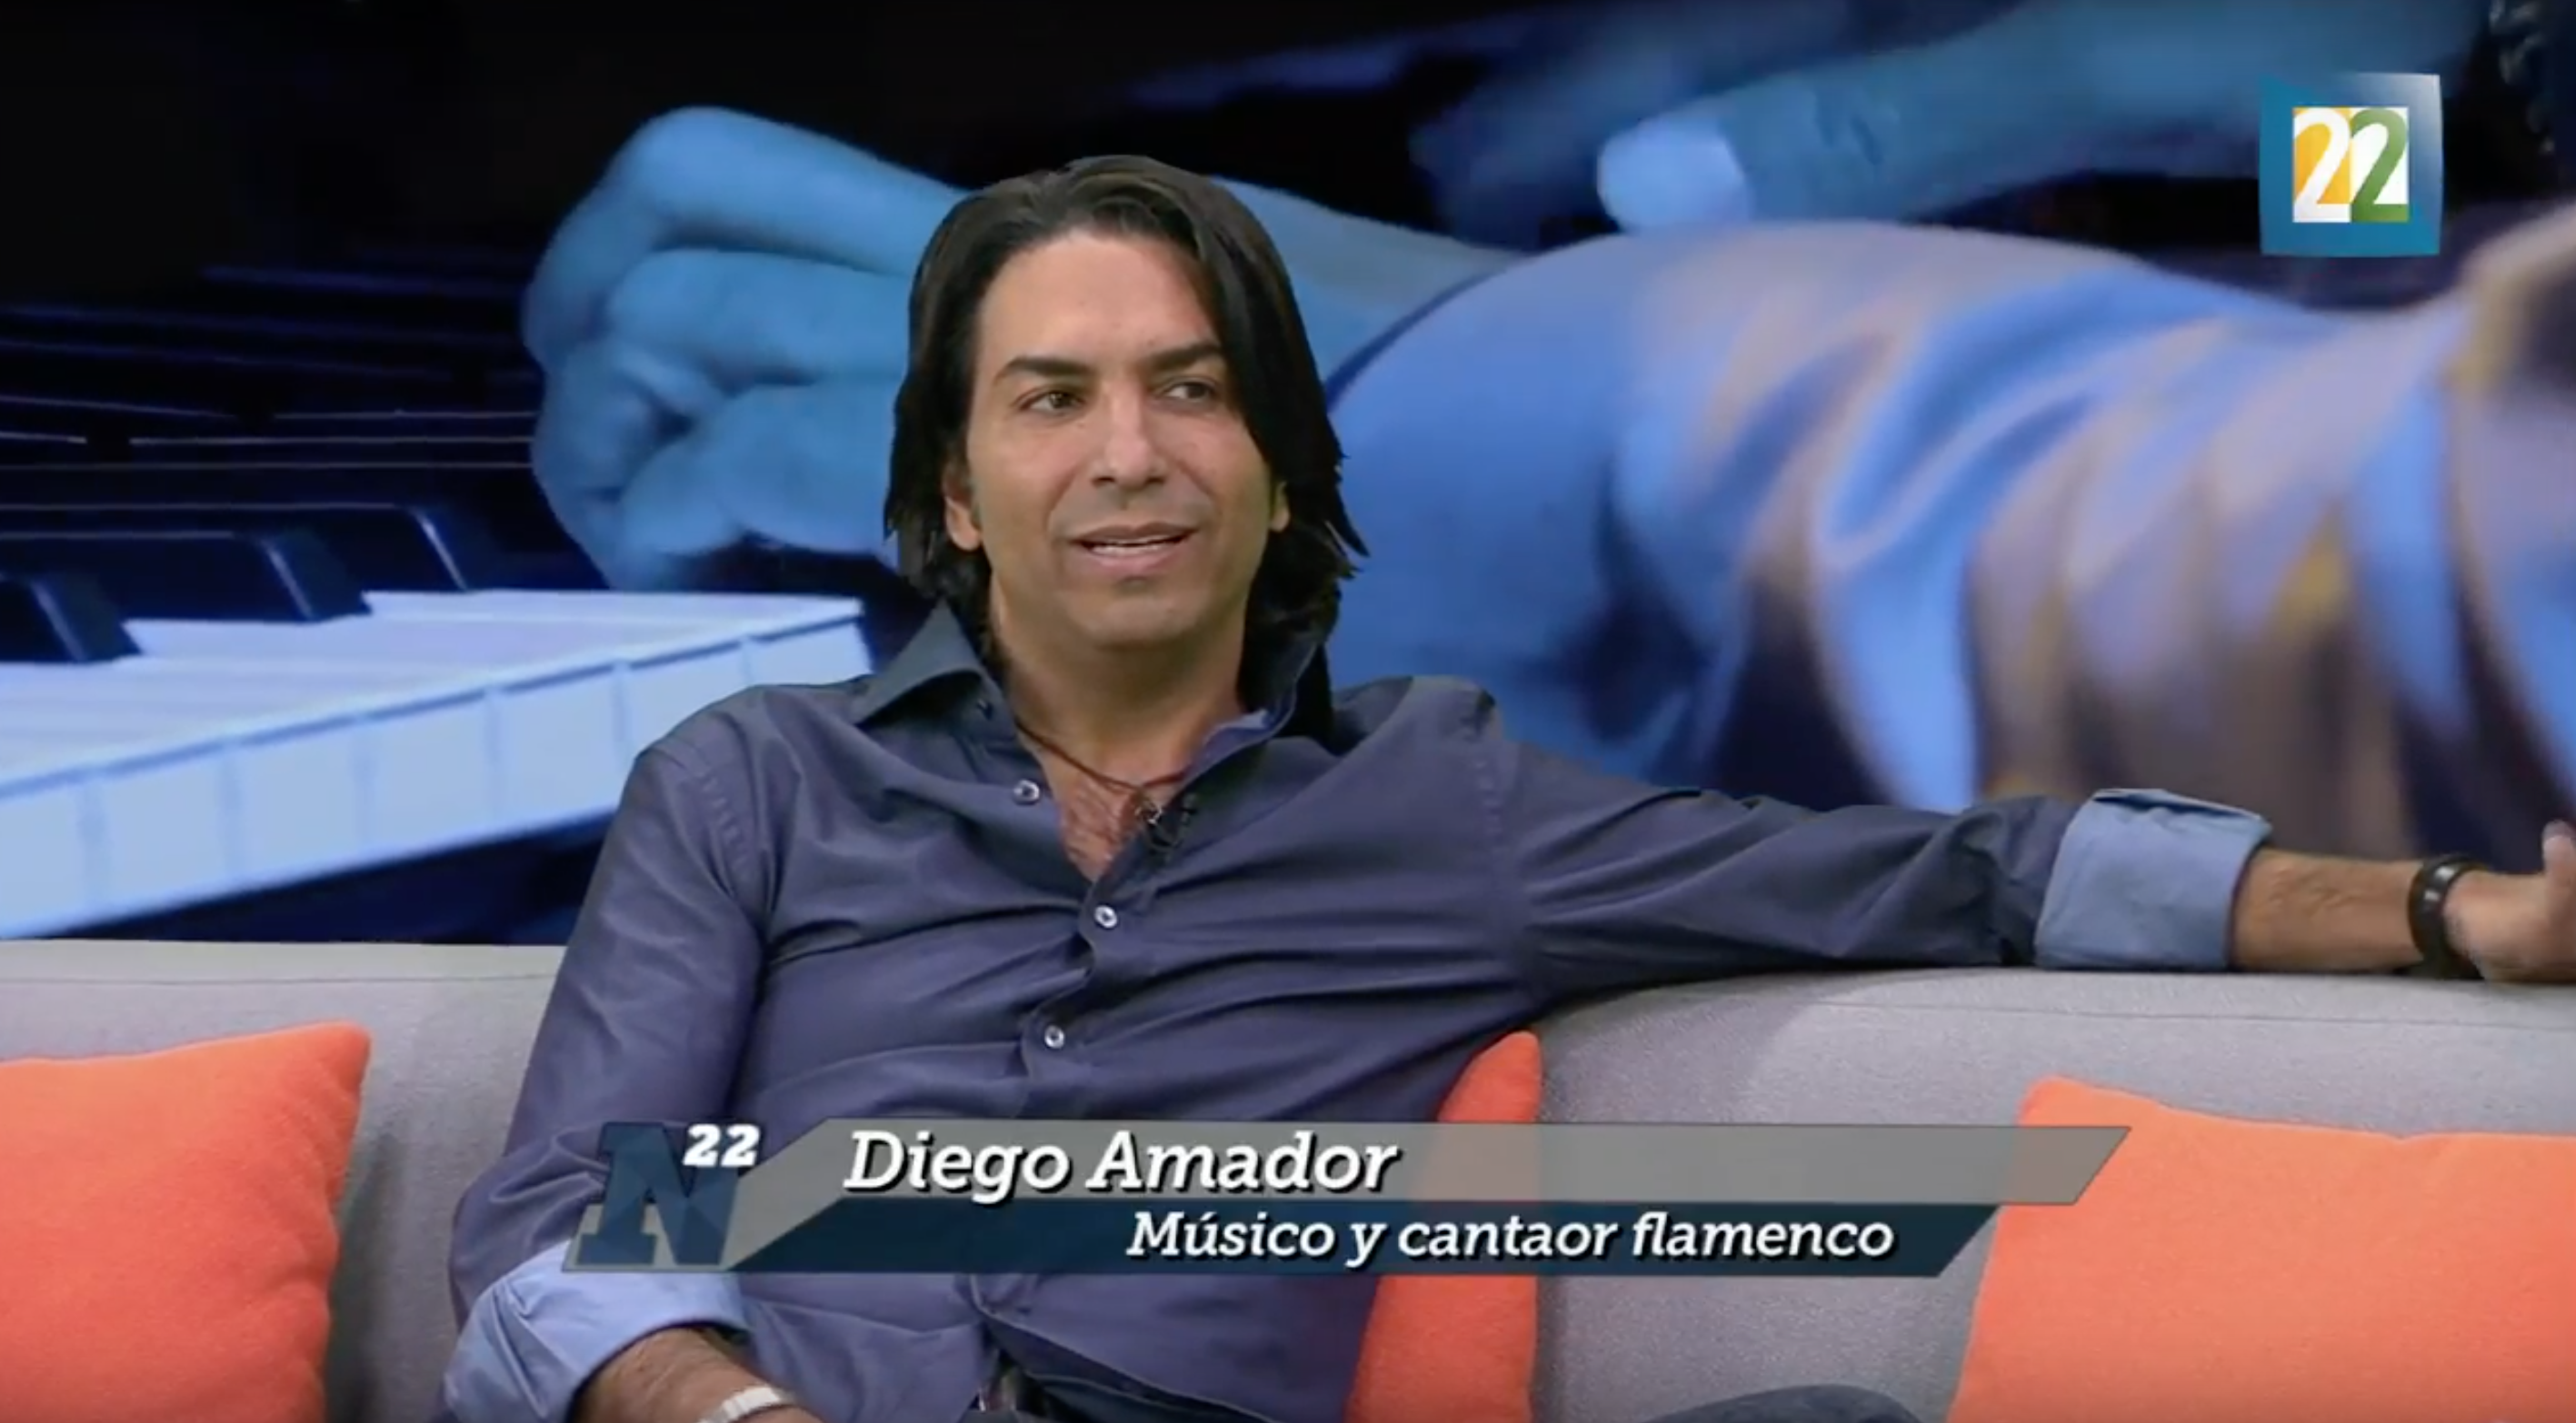 Diego Amador Canal 22 interview